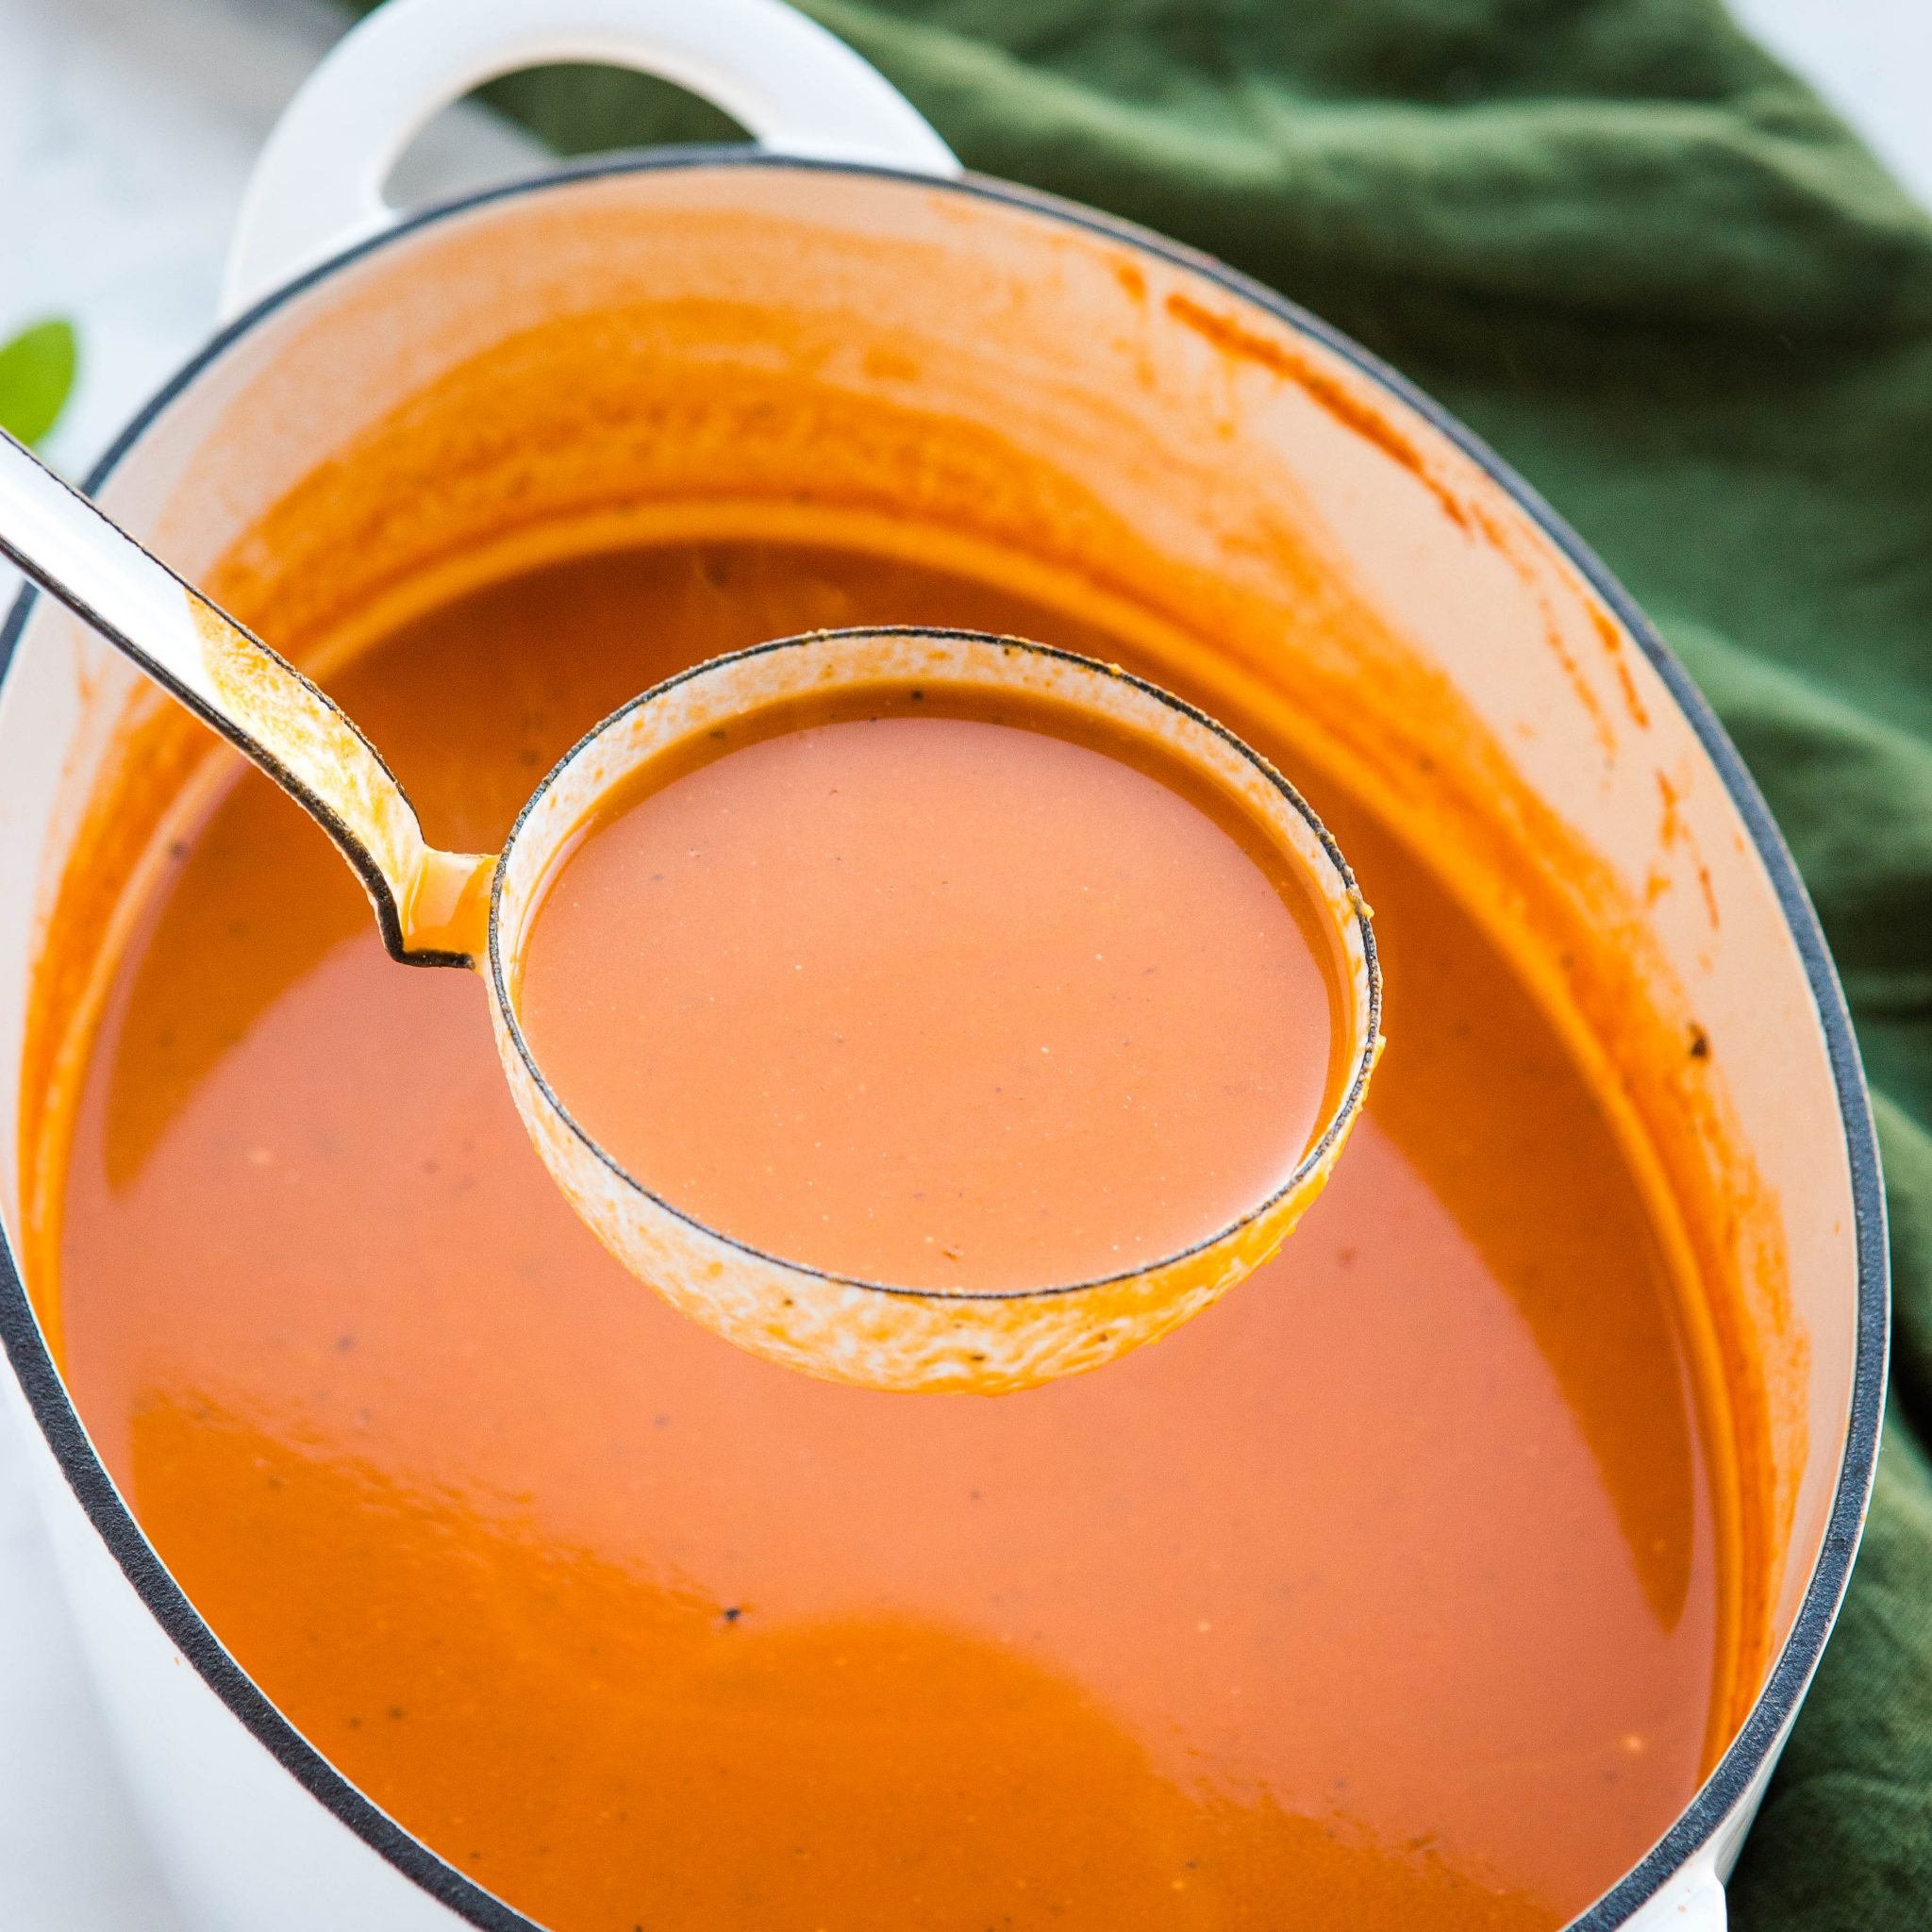 https://thebusybaker.ca/wp-content/uploads/2020/05/easy-homemade-tomato-soup-fb-ig-4-scaled.jpg